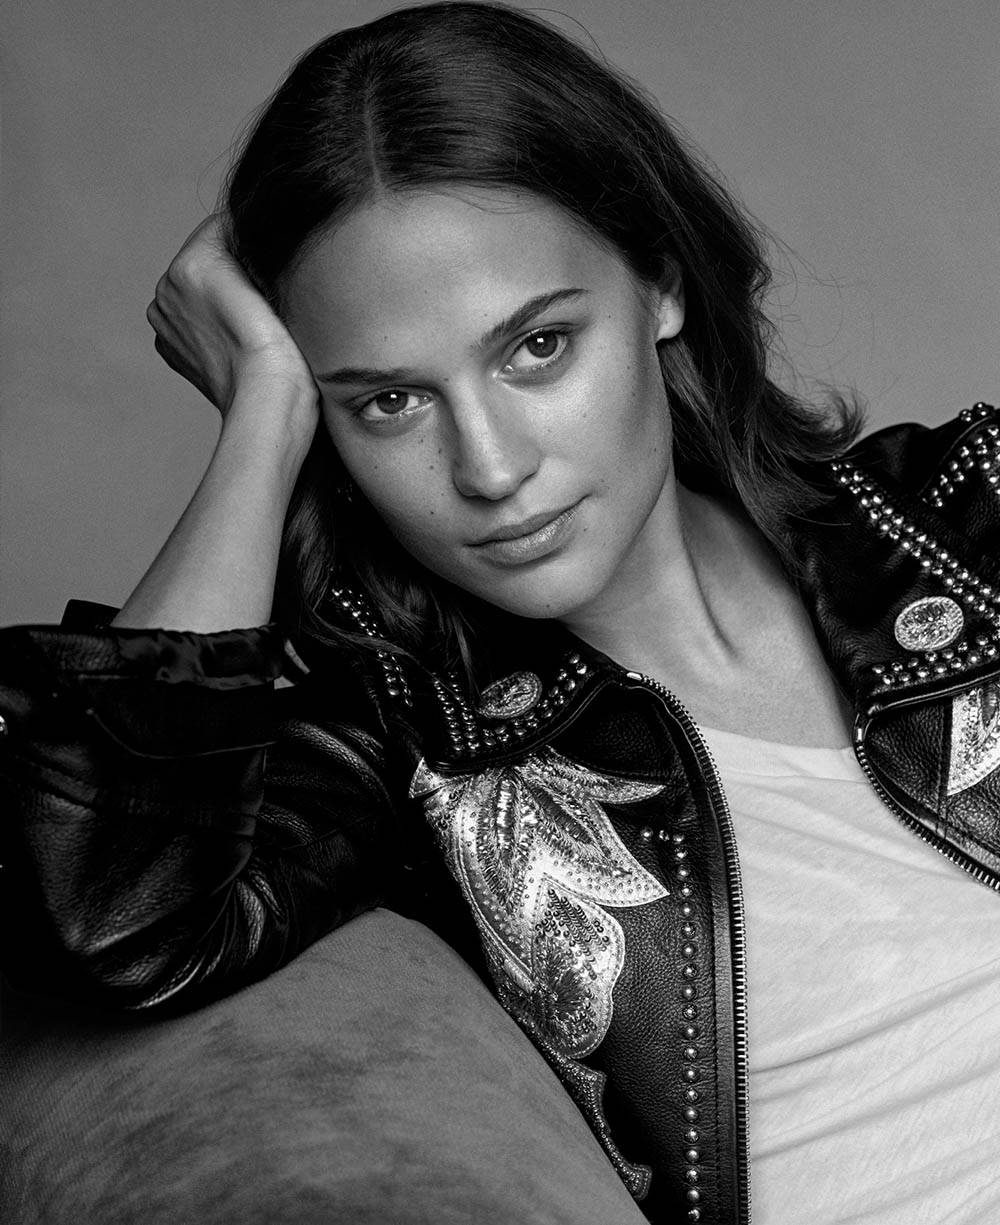 Alicia Vikander covers Marie Claire US April 2018 by Thomas Whiteside